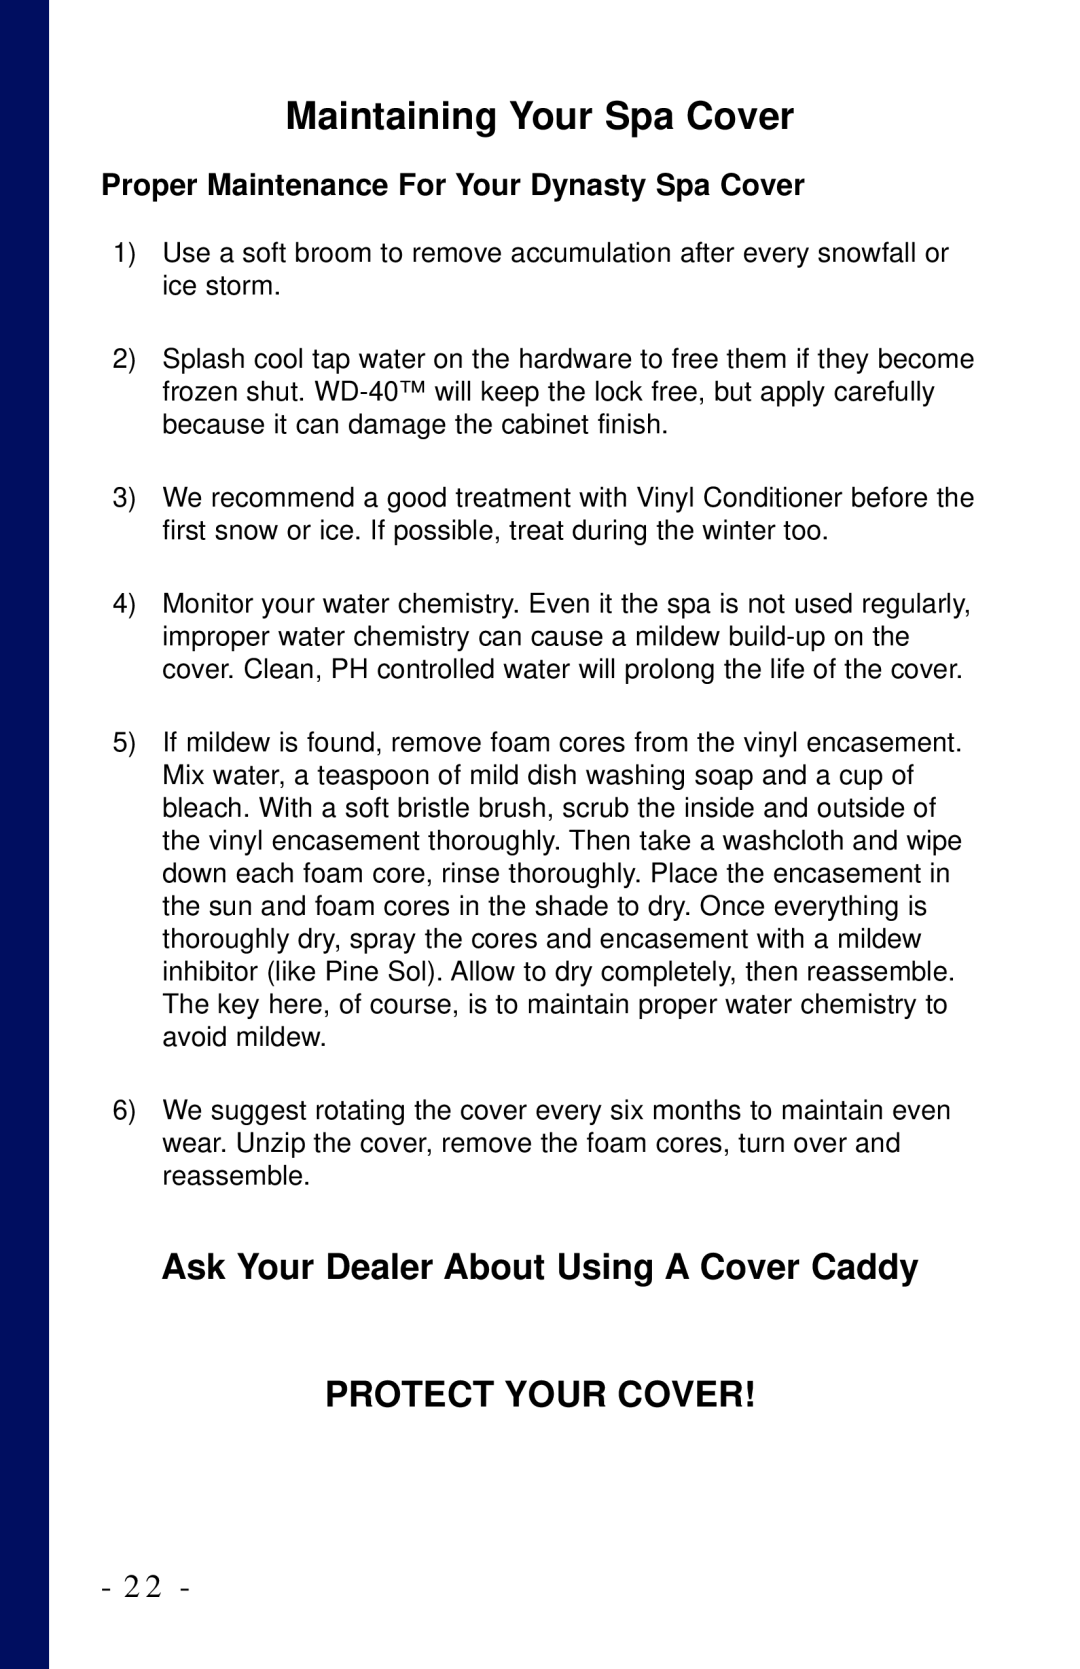 Dynasty Spas 2006 owner manual Maintaining Your Spa Cover, Ask Your Dealer About Using A Cover Caddy, Protect Your Cover 